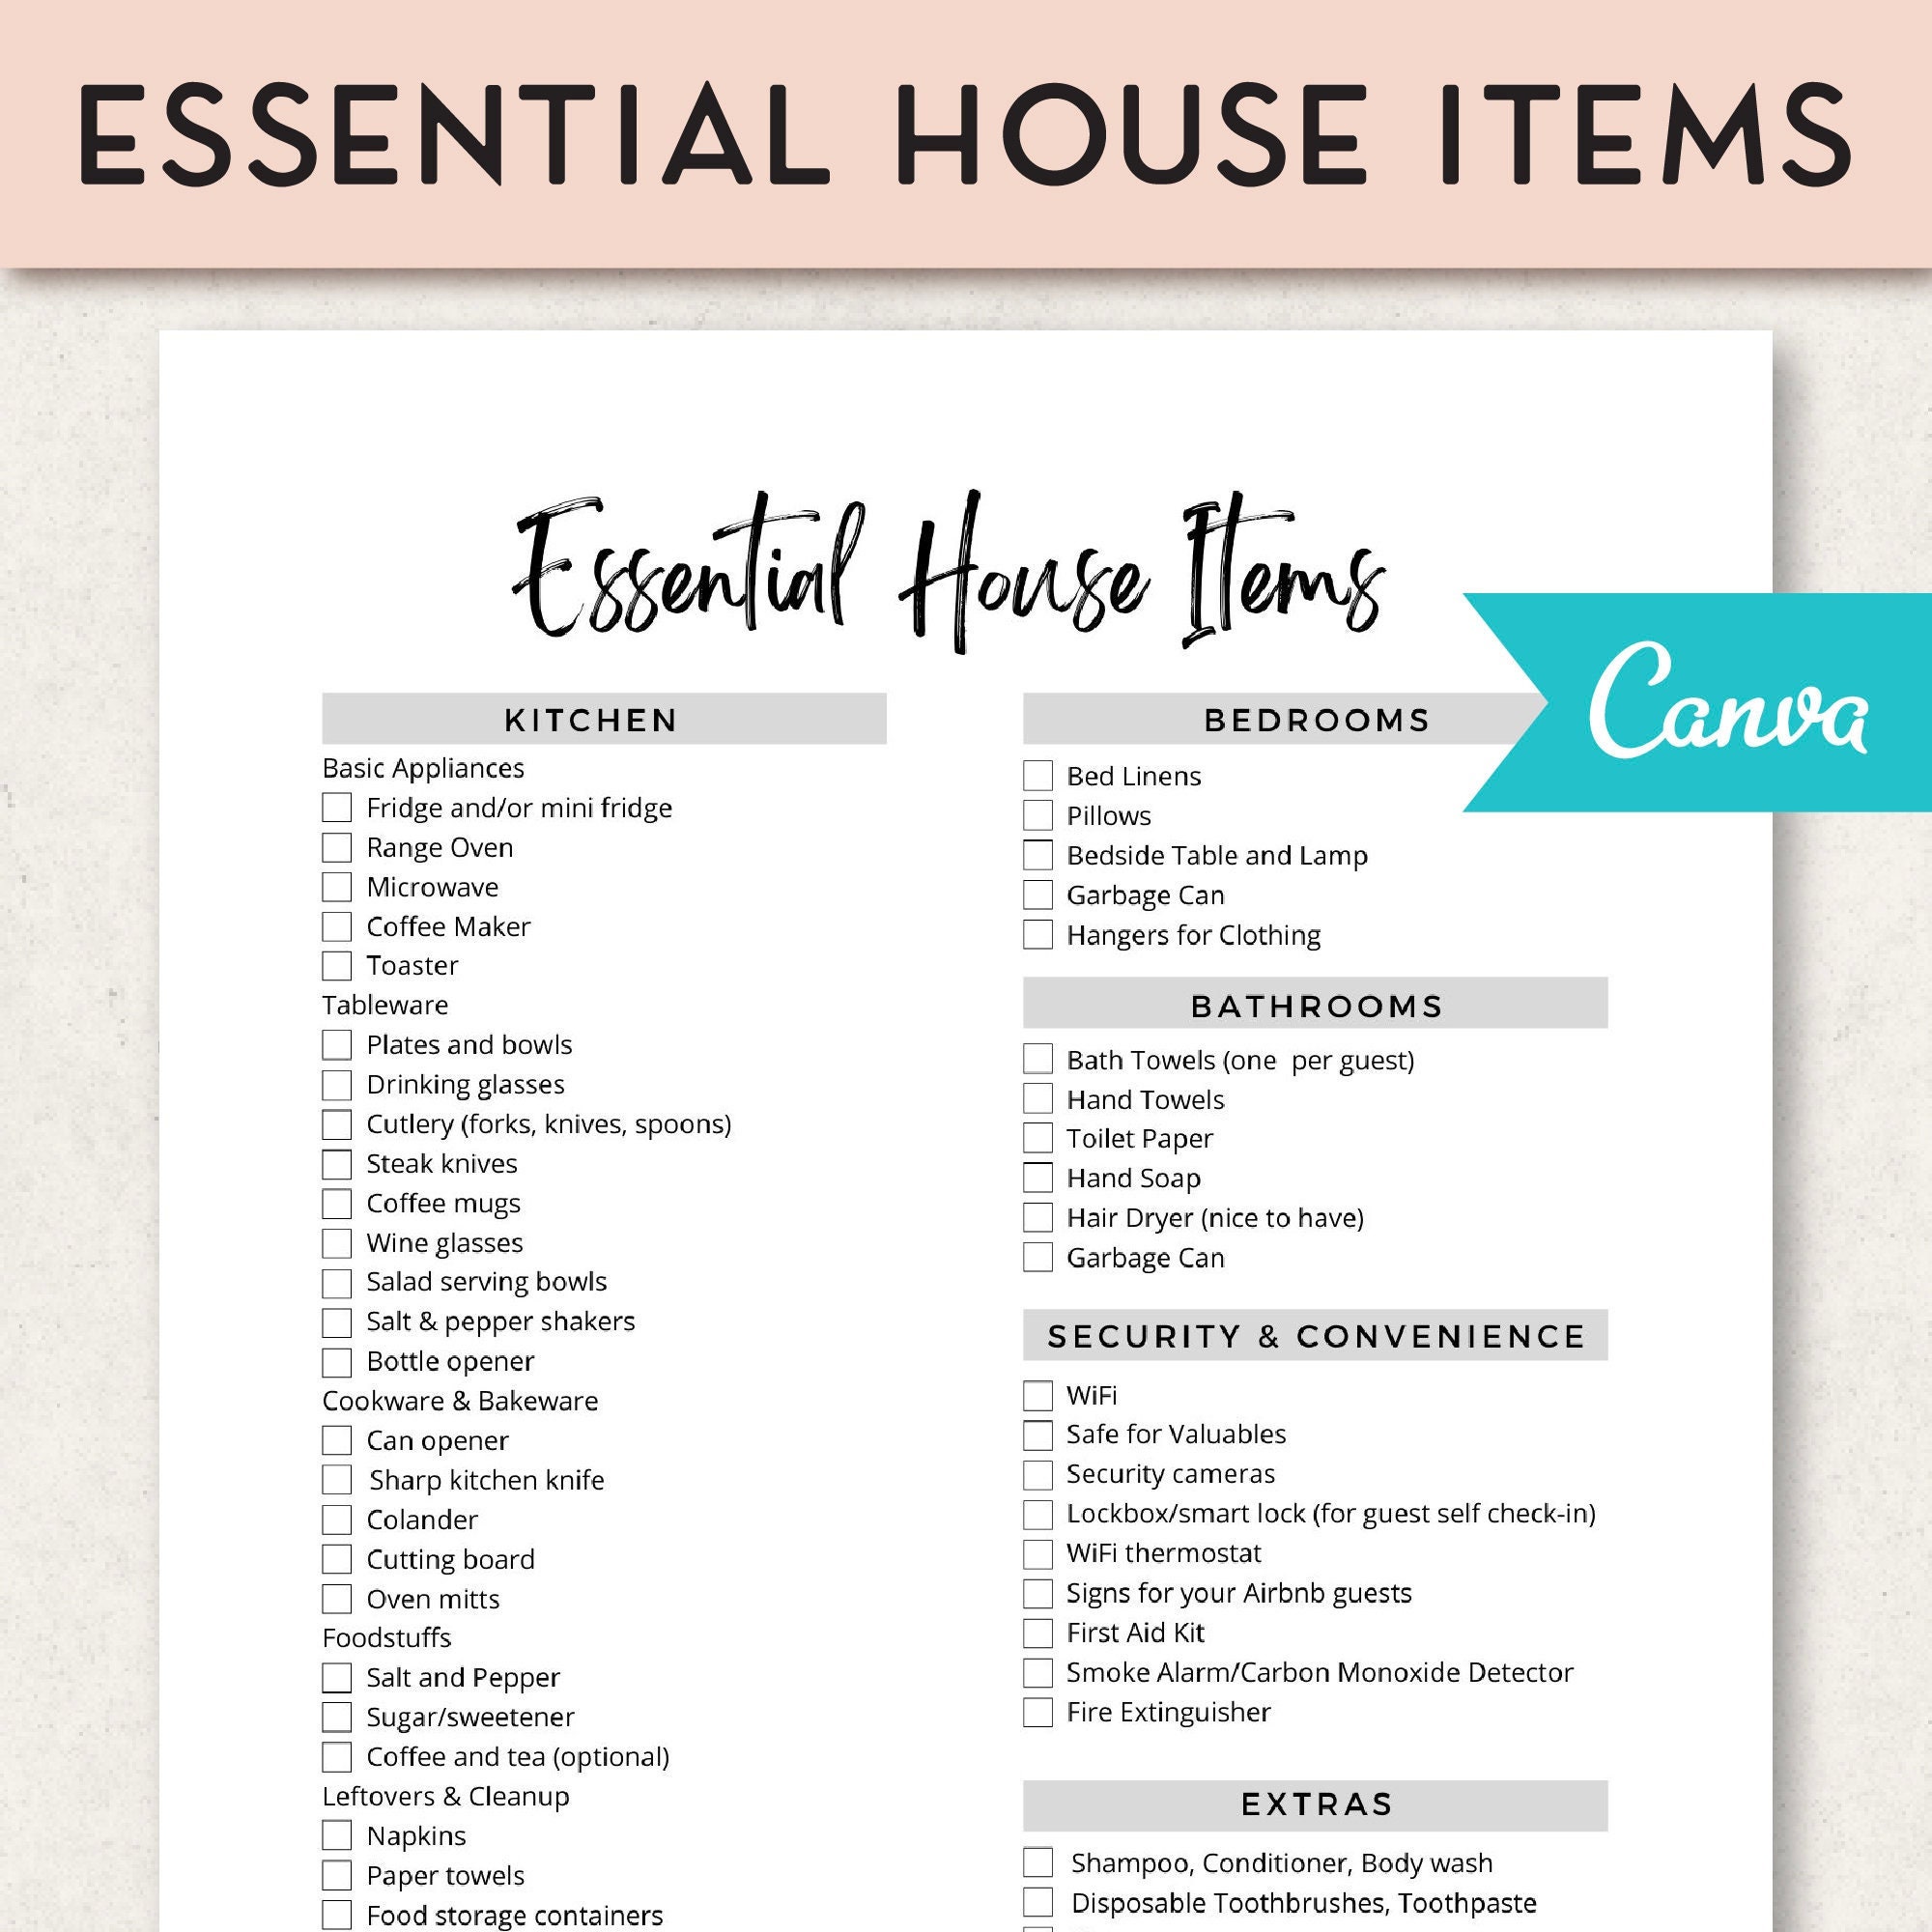 70+ Essential Household Items - A Definitive Checklist You MUST know!